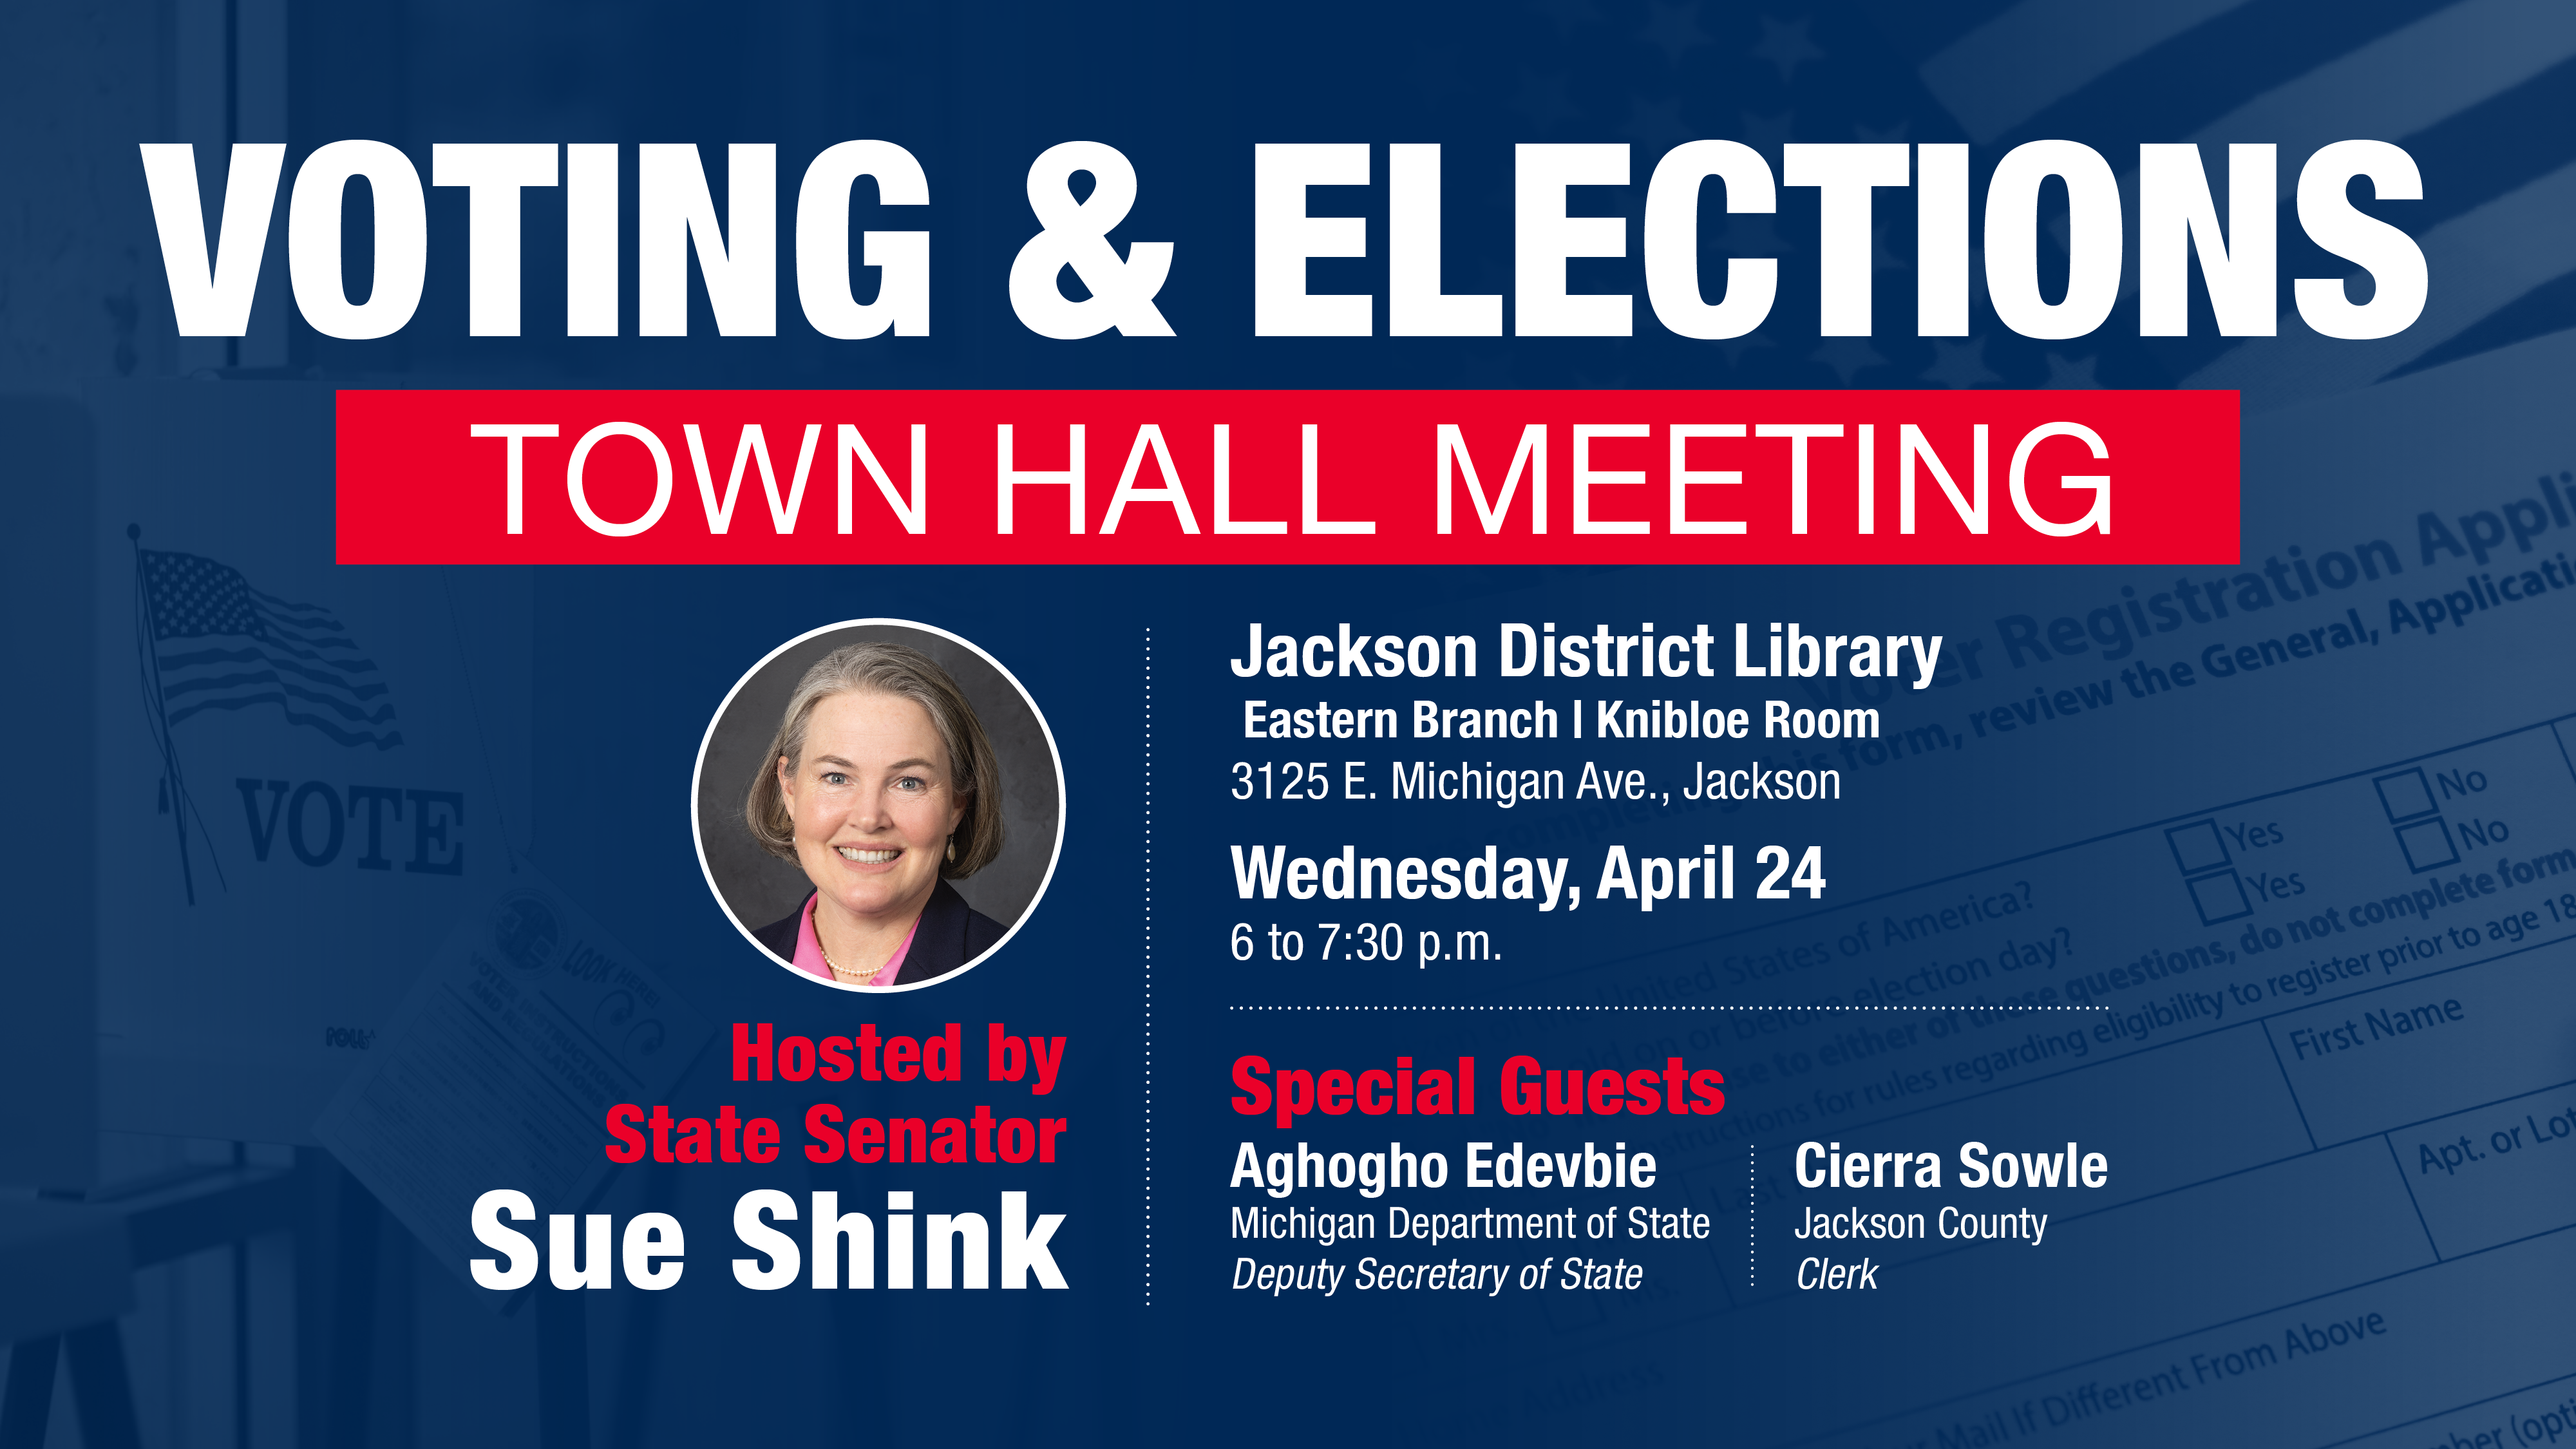 Voting & Election Town Hall